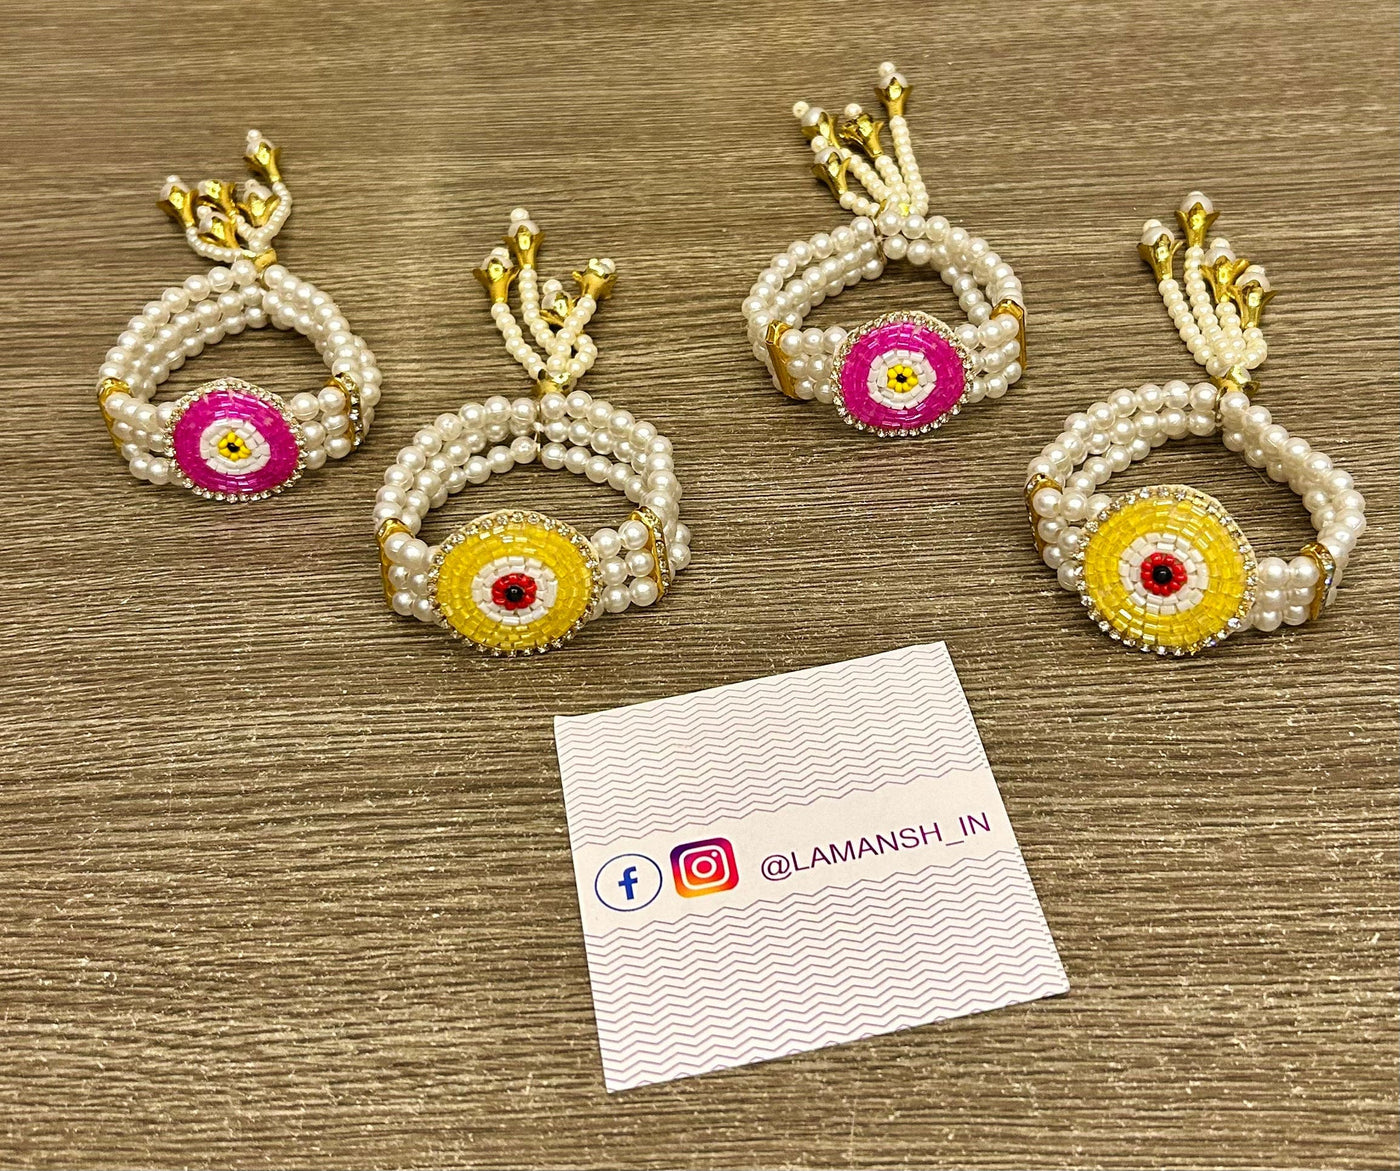 80 Rs pair on buying minimum 50 pairs | Whatsapp at 8619550223 evil eye bracelets LAMANSH Evil Eye 🧿 Elastic Bracelets for giveaways 🎁 to bridesmaids and guests / Rakhi bracelets for brothers, sisters and bhabhi